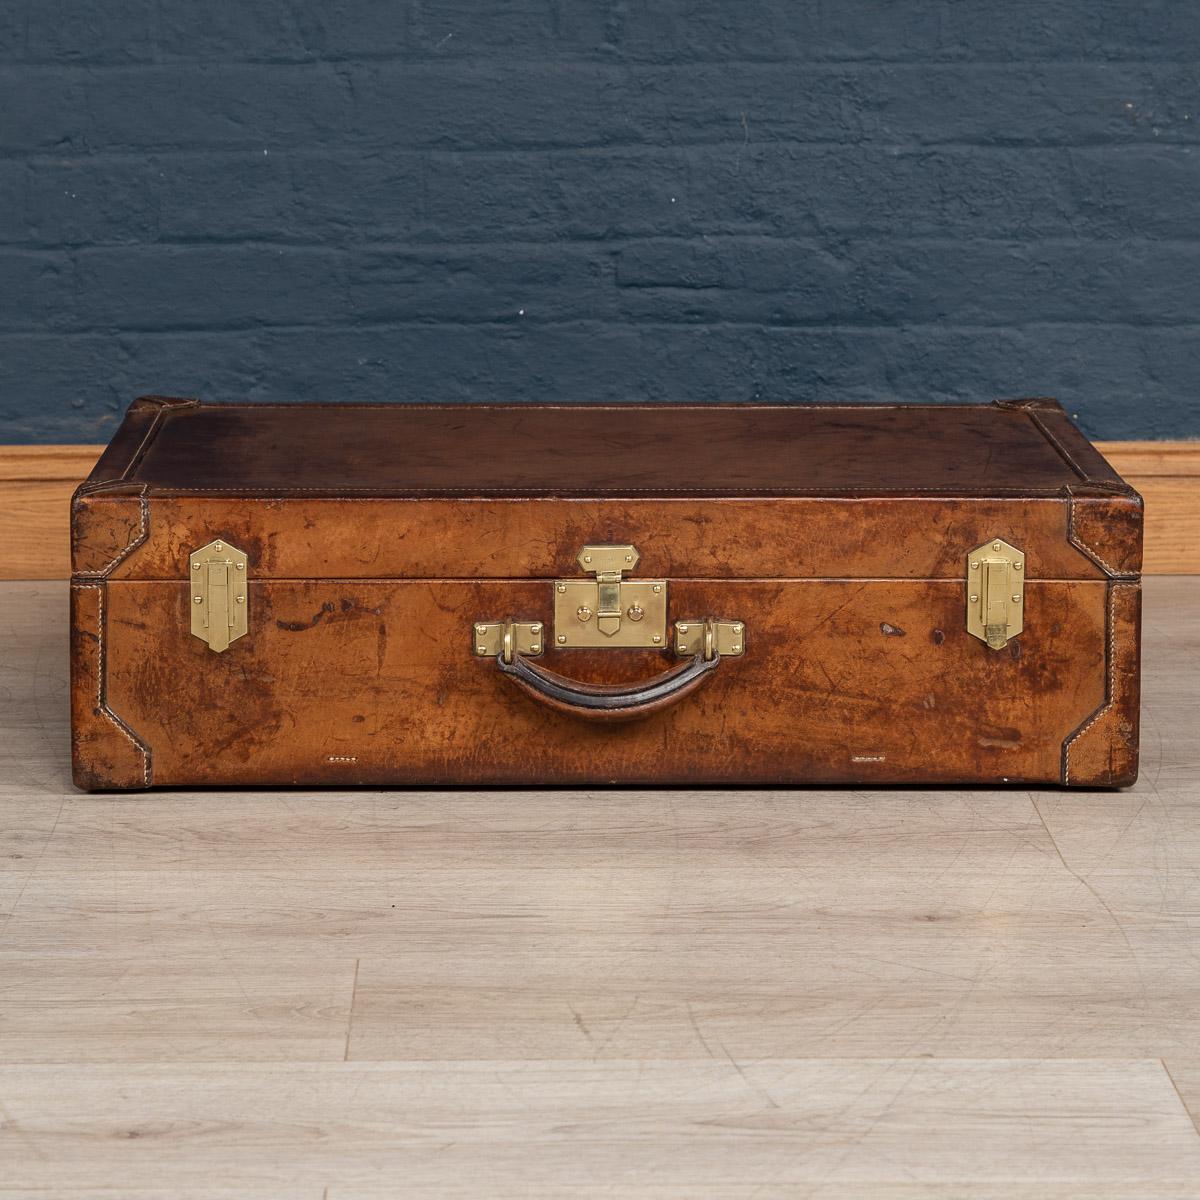 A very rare Hermès suitcase in natural cow hide covering and brass locks and side latches, made in France at the beginning of the 20th century. A great addition to any collection and a fantastic item to have as part of a stack in any interior